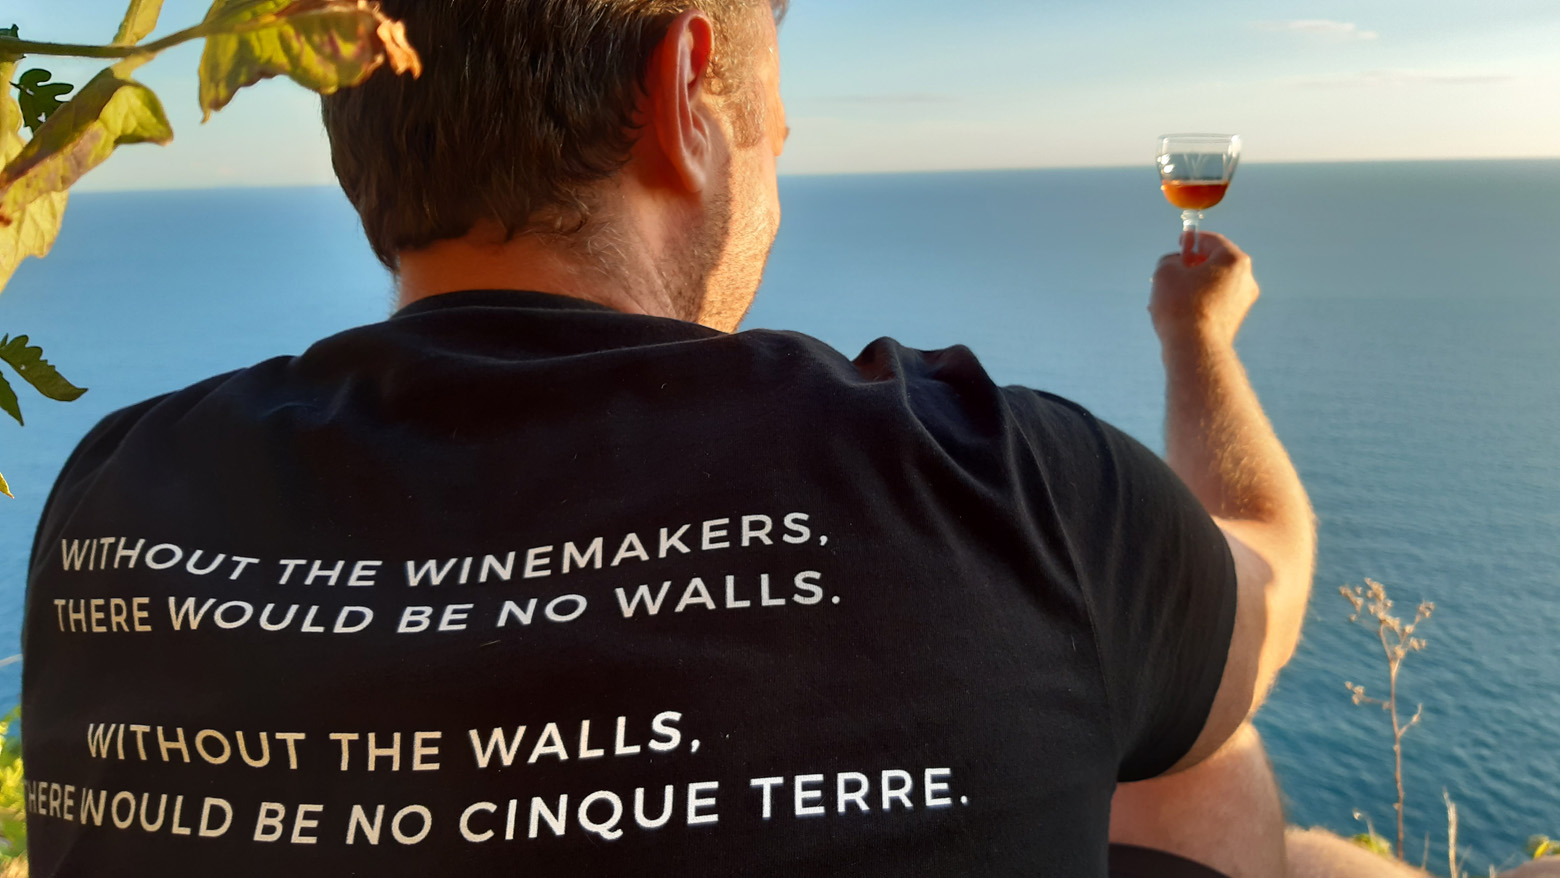 Without the Winemakers there would be no walls. Without the walls there would be no Cinque Terre